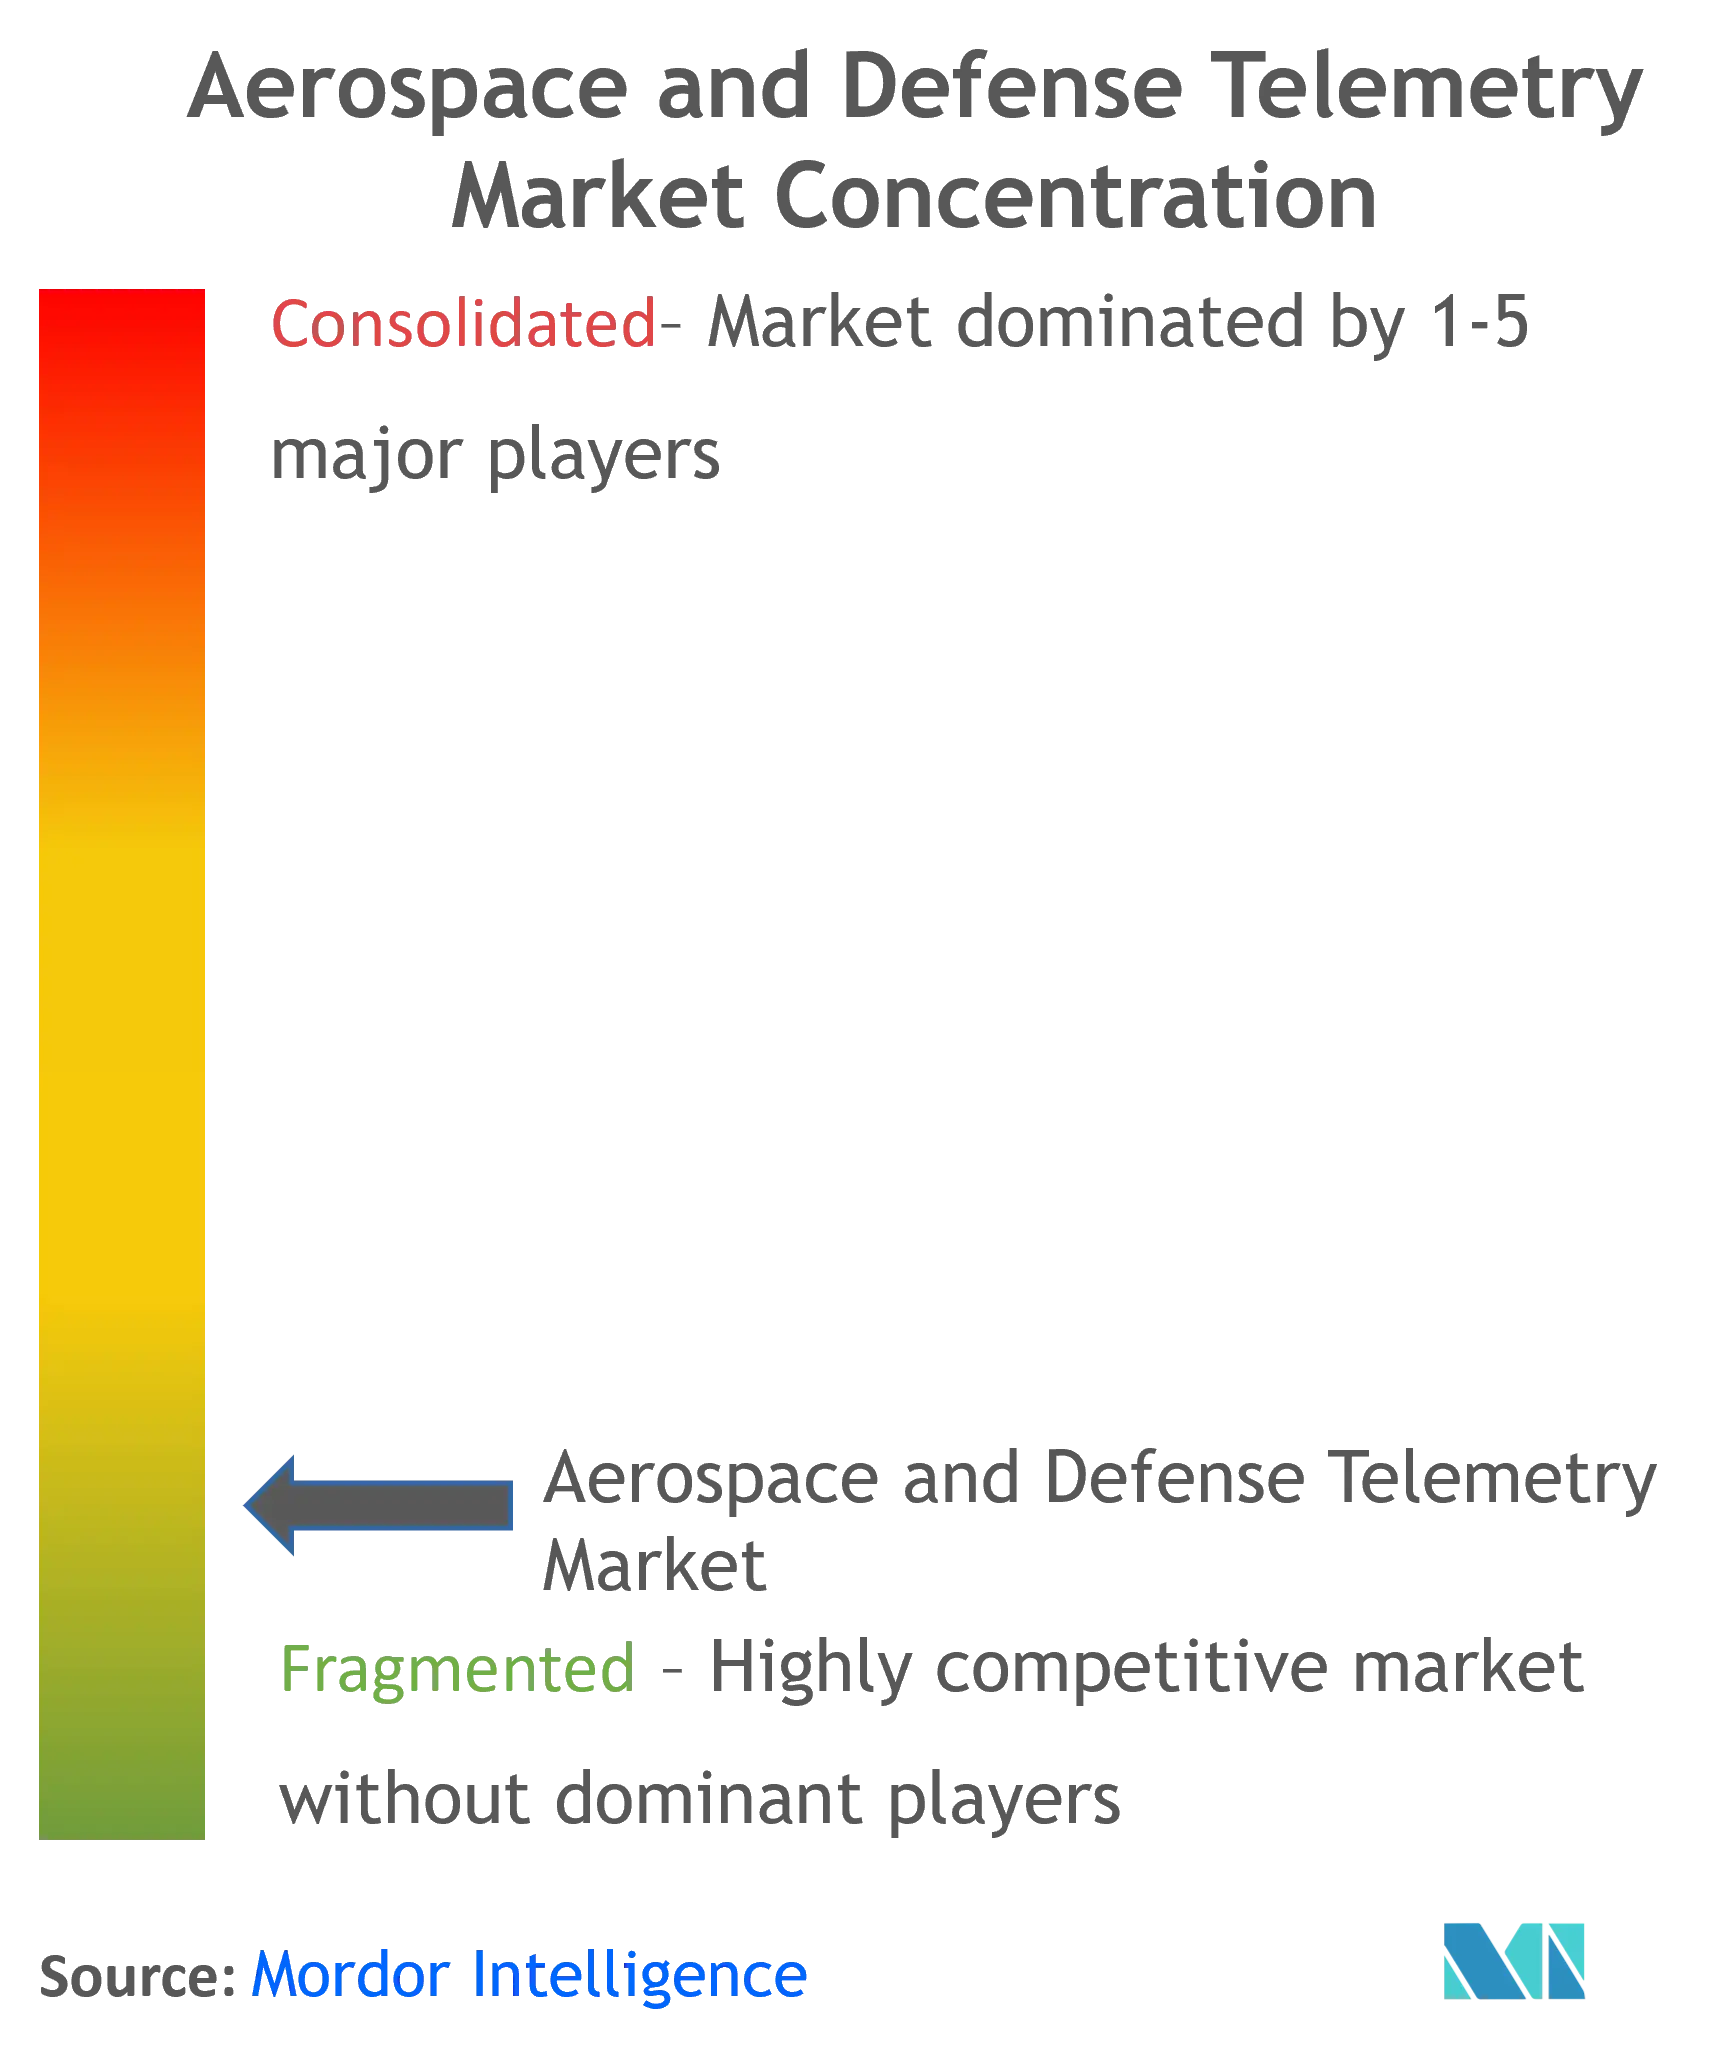 Aerospace And Defense Telemetry Market Concentration